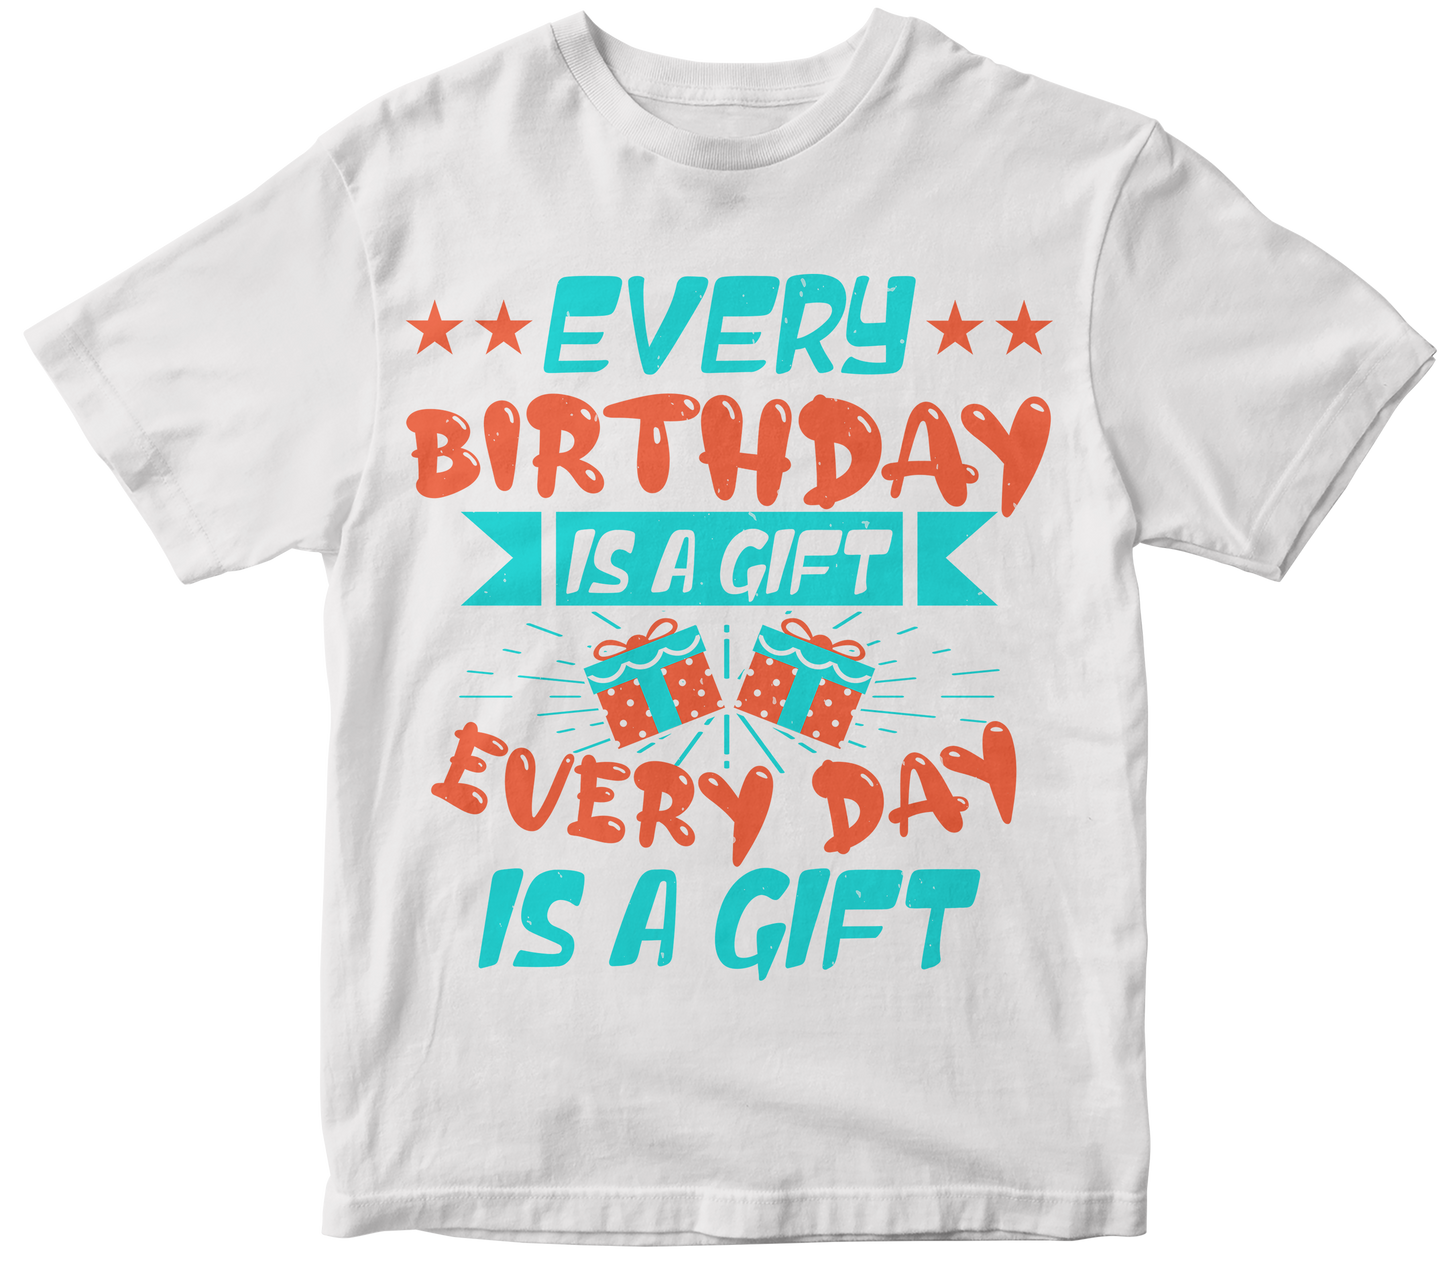 Every Birthday is a Gift Every day is a gift